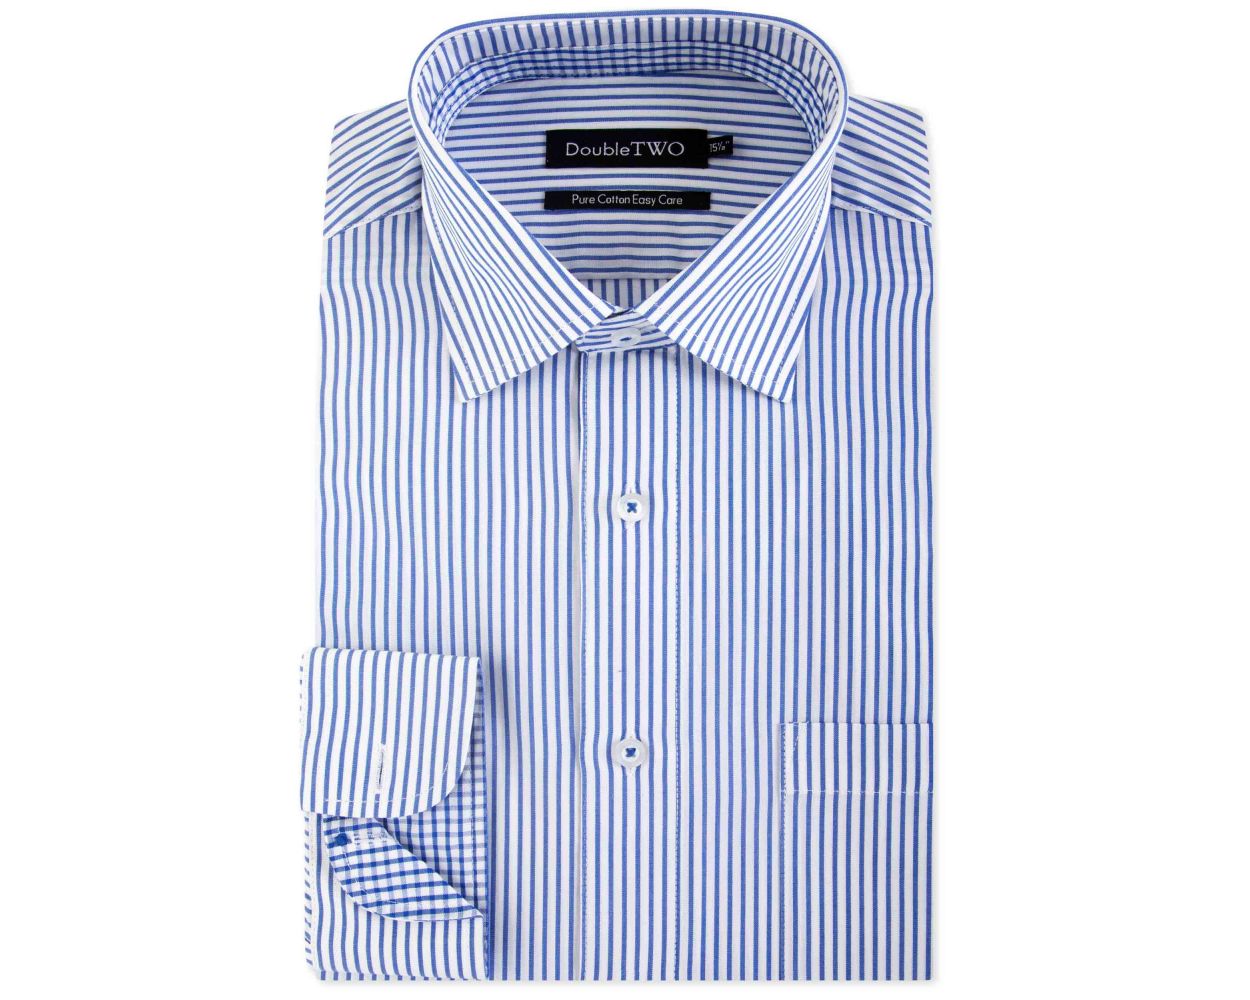 Men's Blue Candy Stripe Formal Shirt | Double TWO